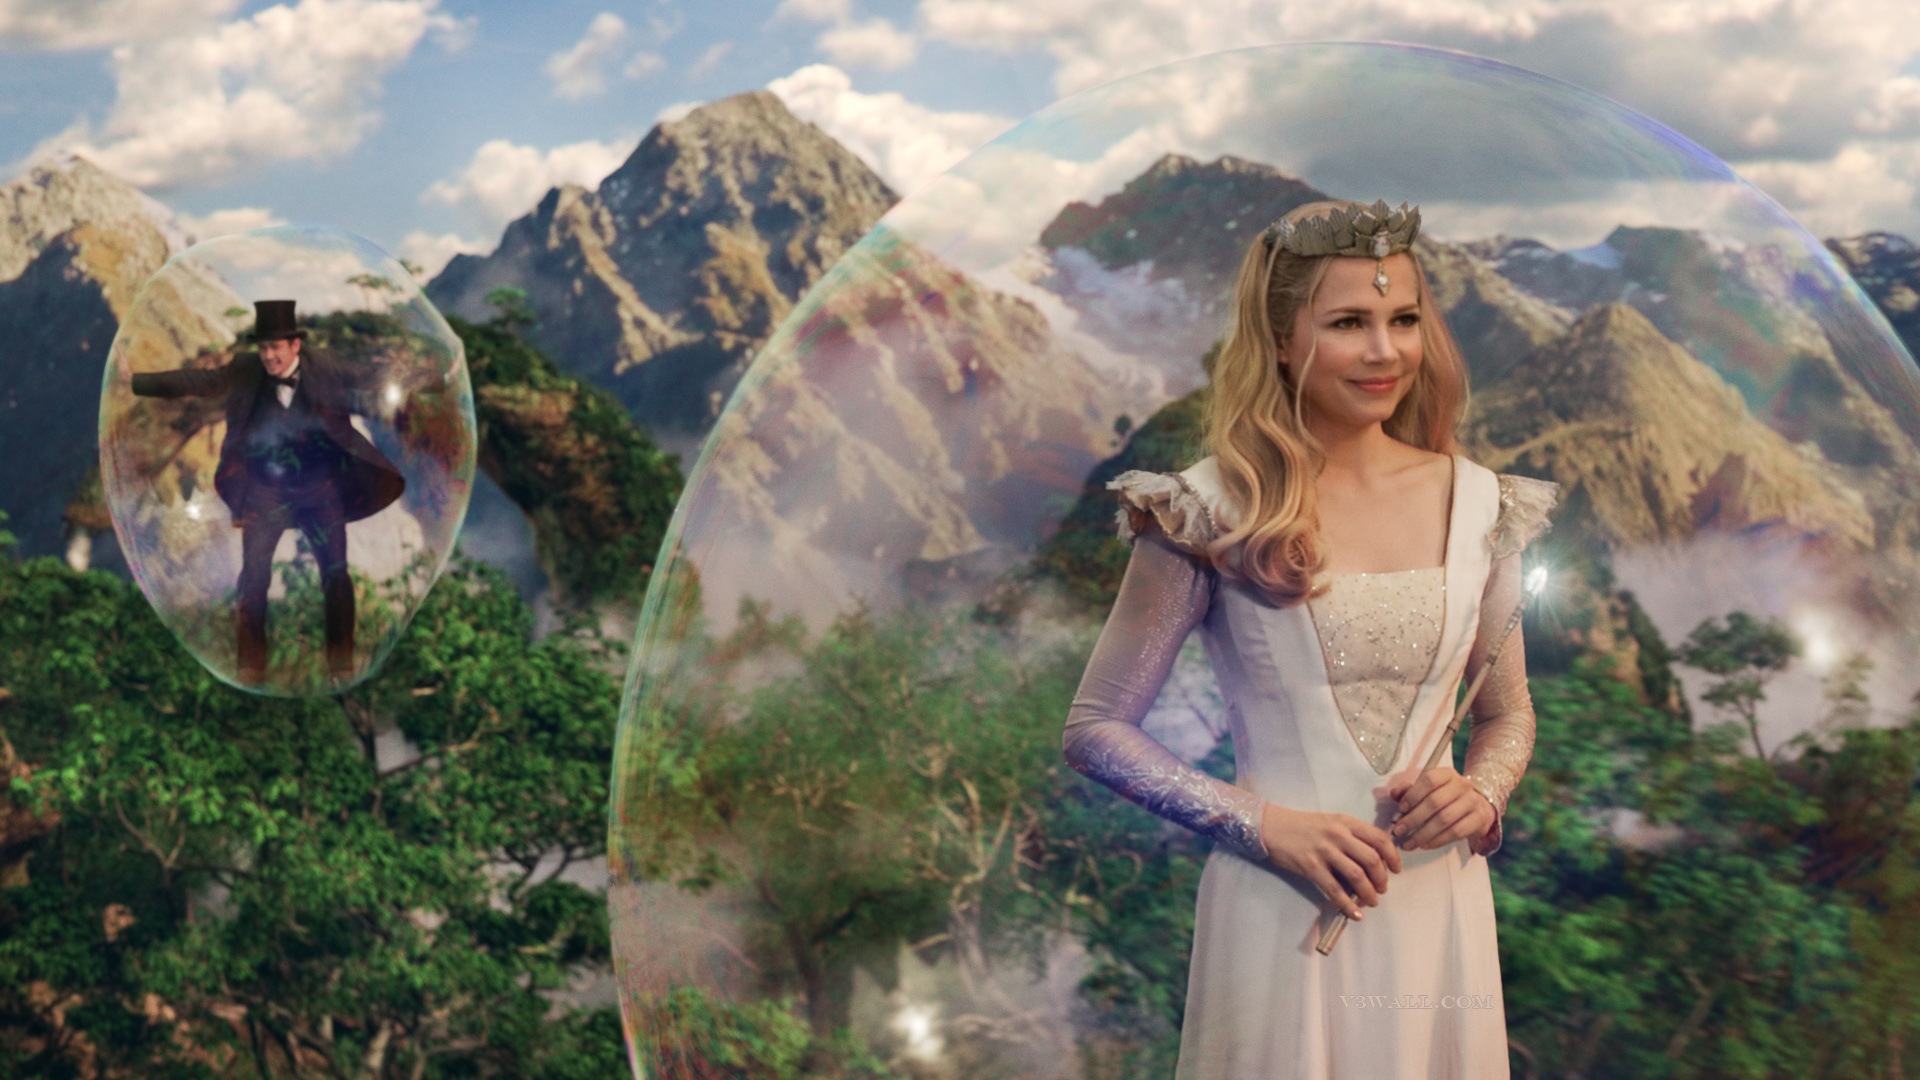 Oz The Great and Powerful 绿野仙踪 高清壁纸17 - 1920x1080